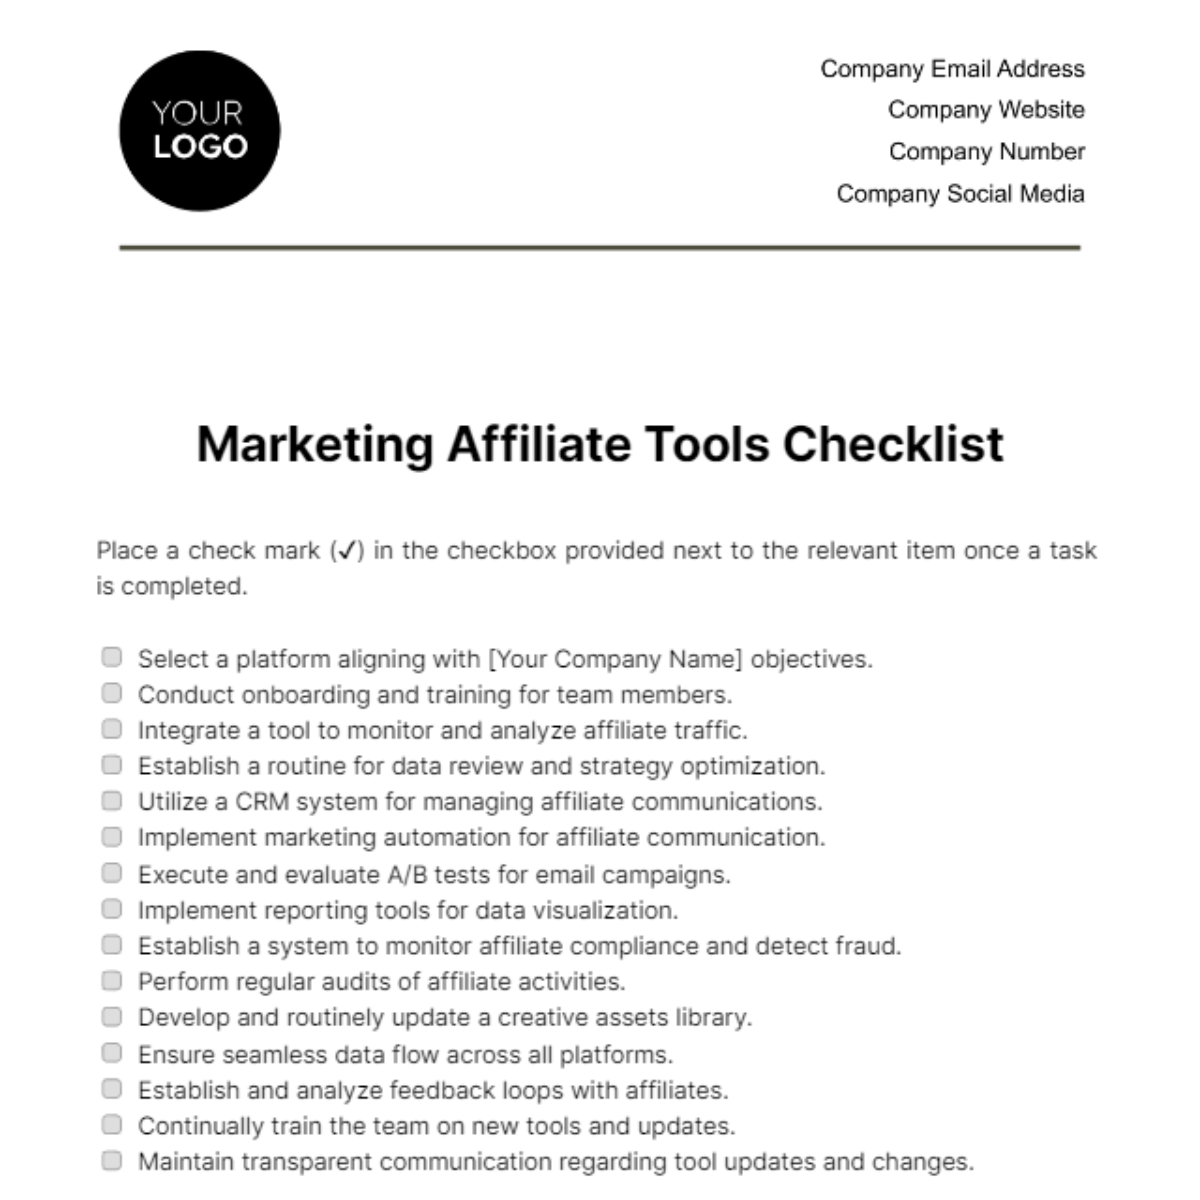 Free Marketing Affiliate Tools Checklist Template